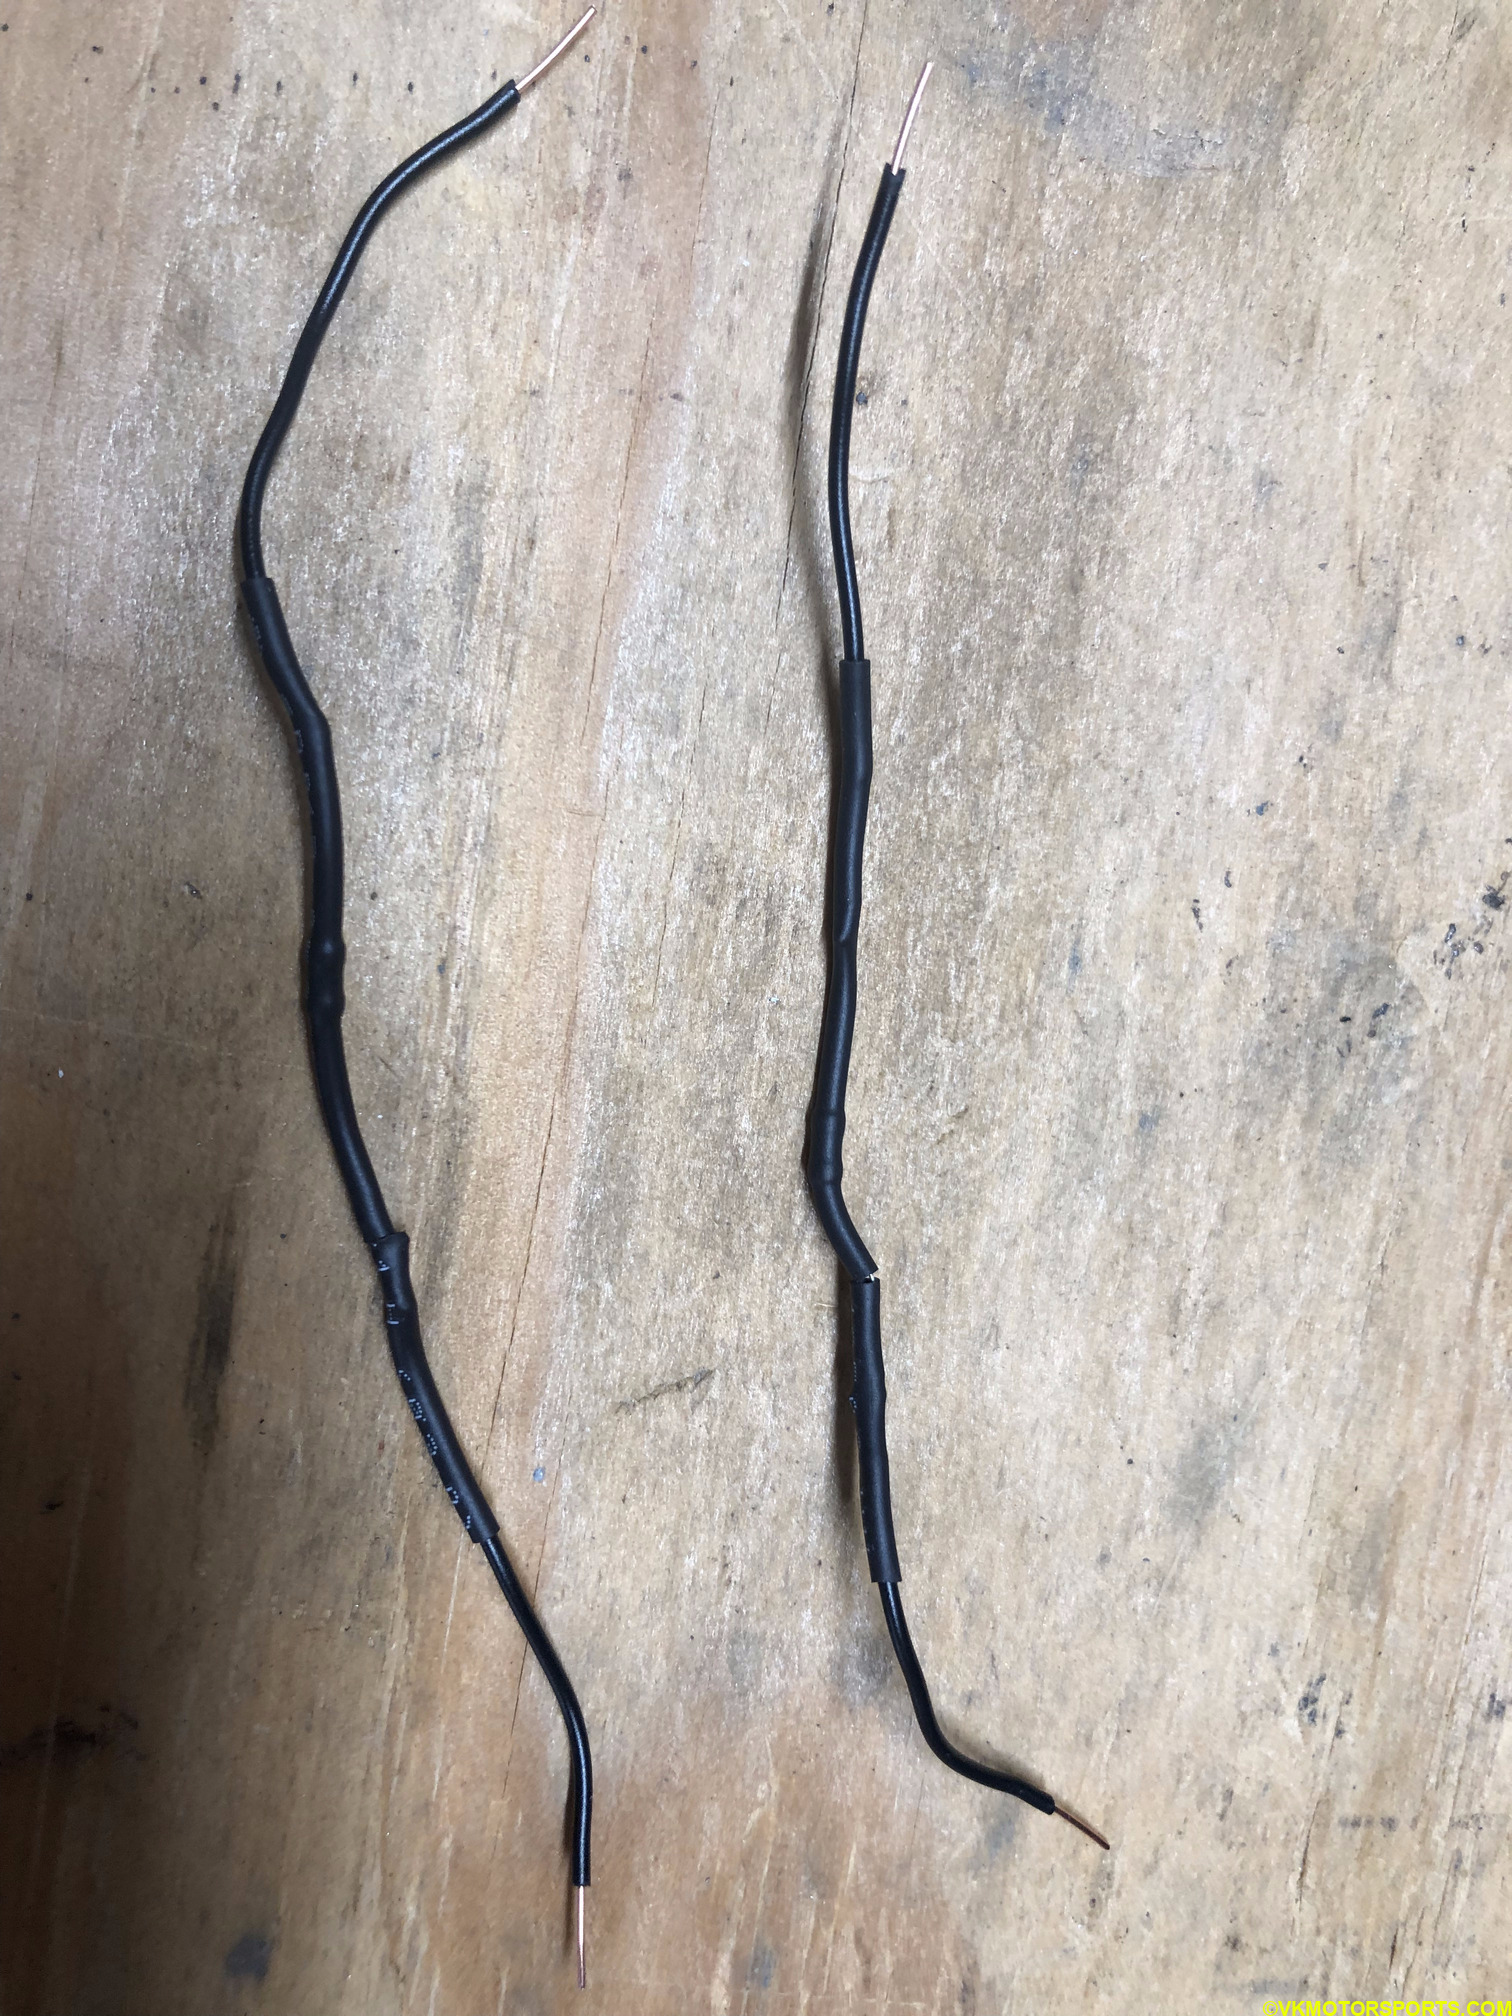 Figure 4. Heat shrink tubing covered exposted connections